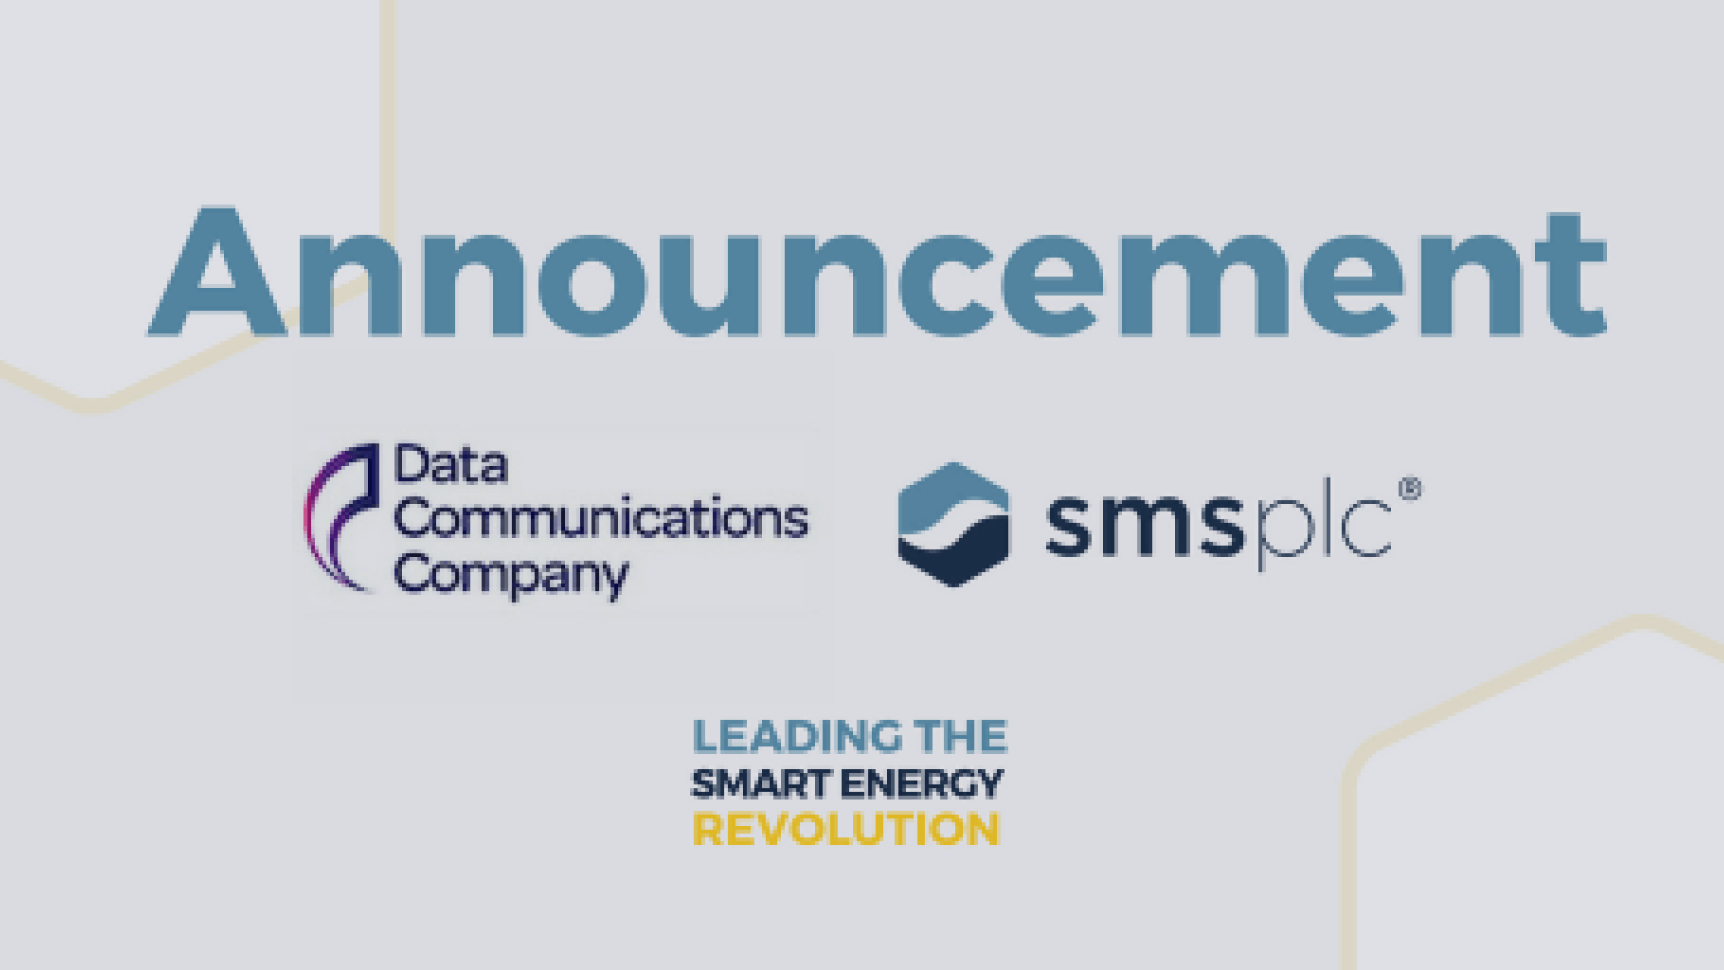 Announcement, Data Communications Company, SMS